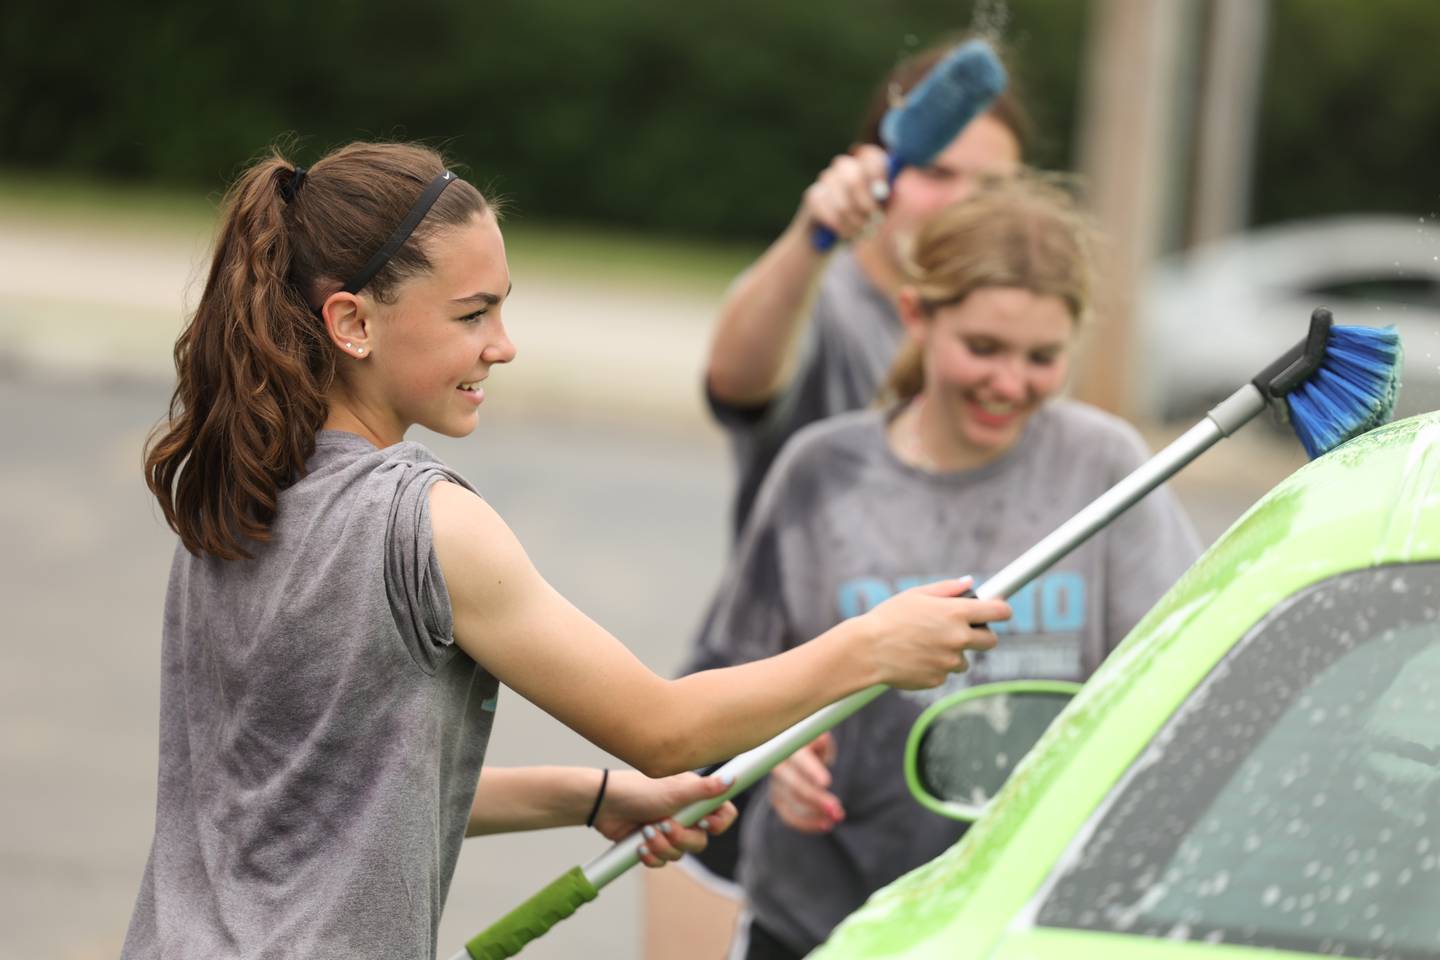 Kate Richardson washes a car for a fundraiser. The Rhino 13U Softball team took advantage of the warm weather to hold a car wash to raise funds for the team. Monday, June 13, 2022 in Joliet.